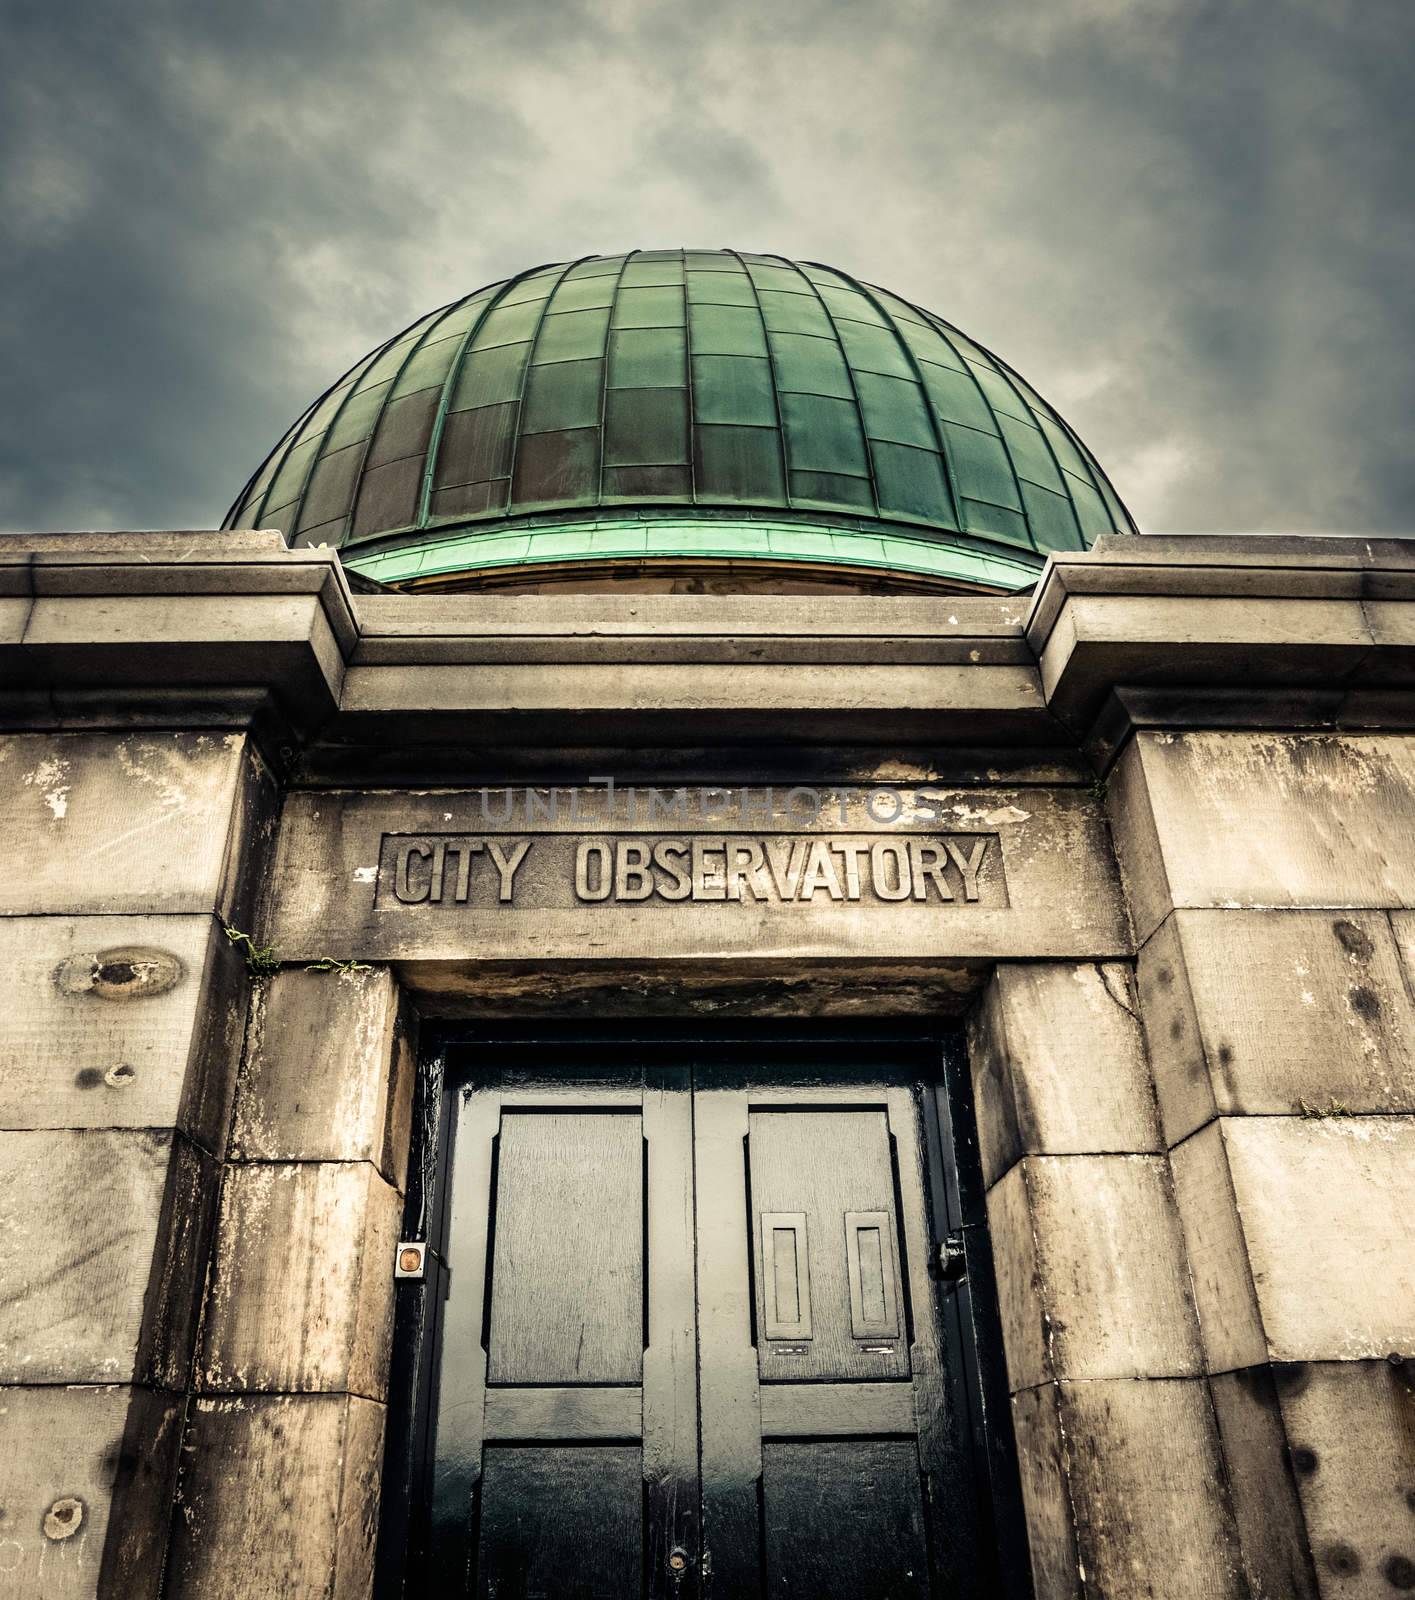 Vintage Style Image Of The City Observatory On Carlton Hill In Edinburgh